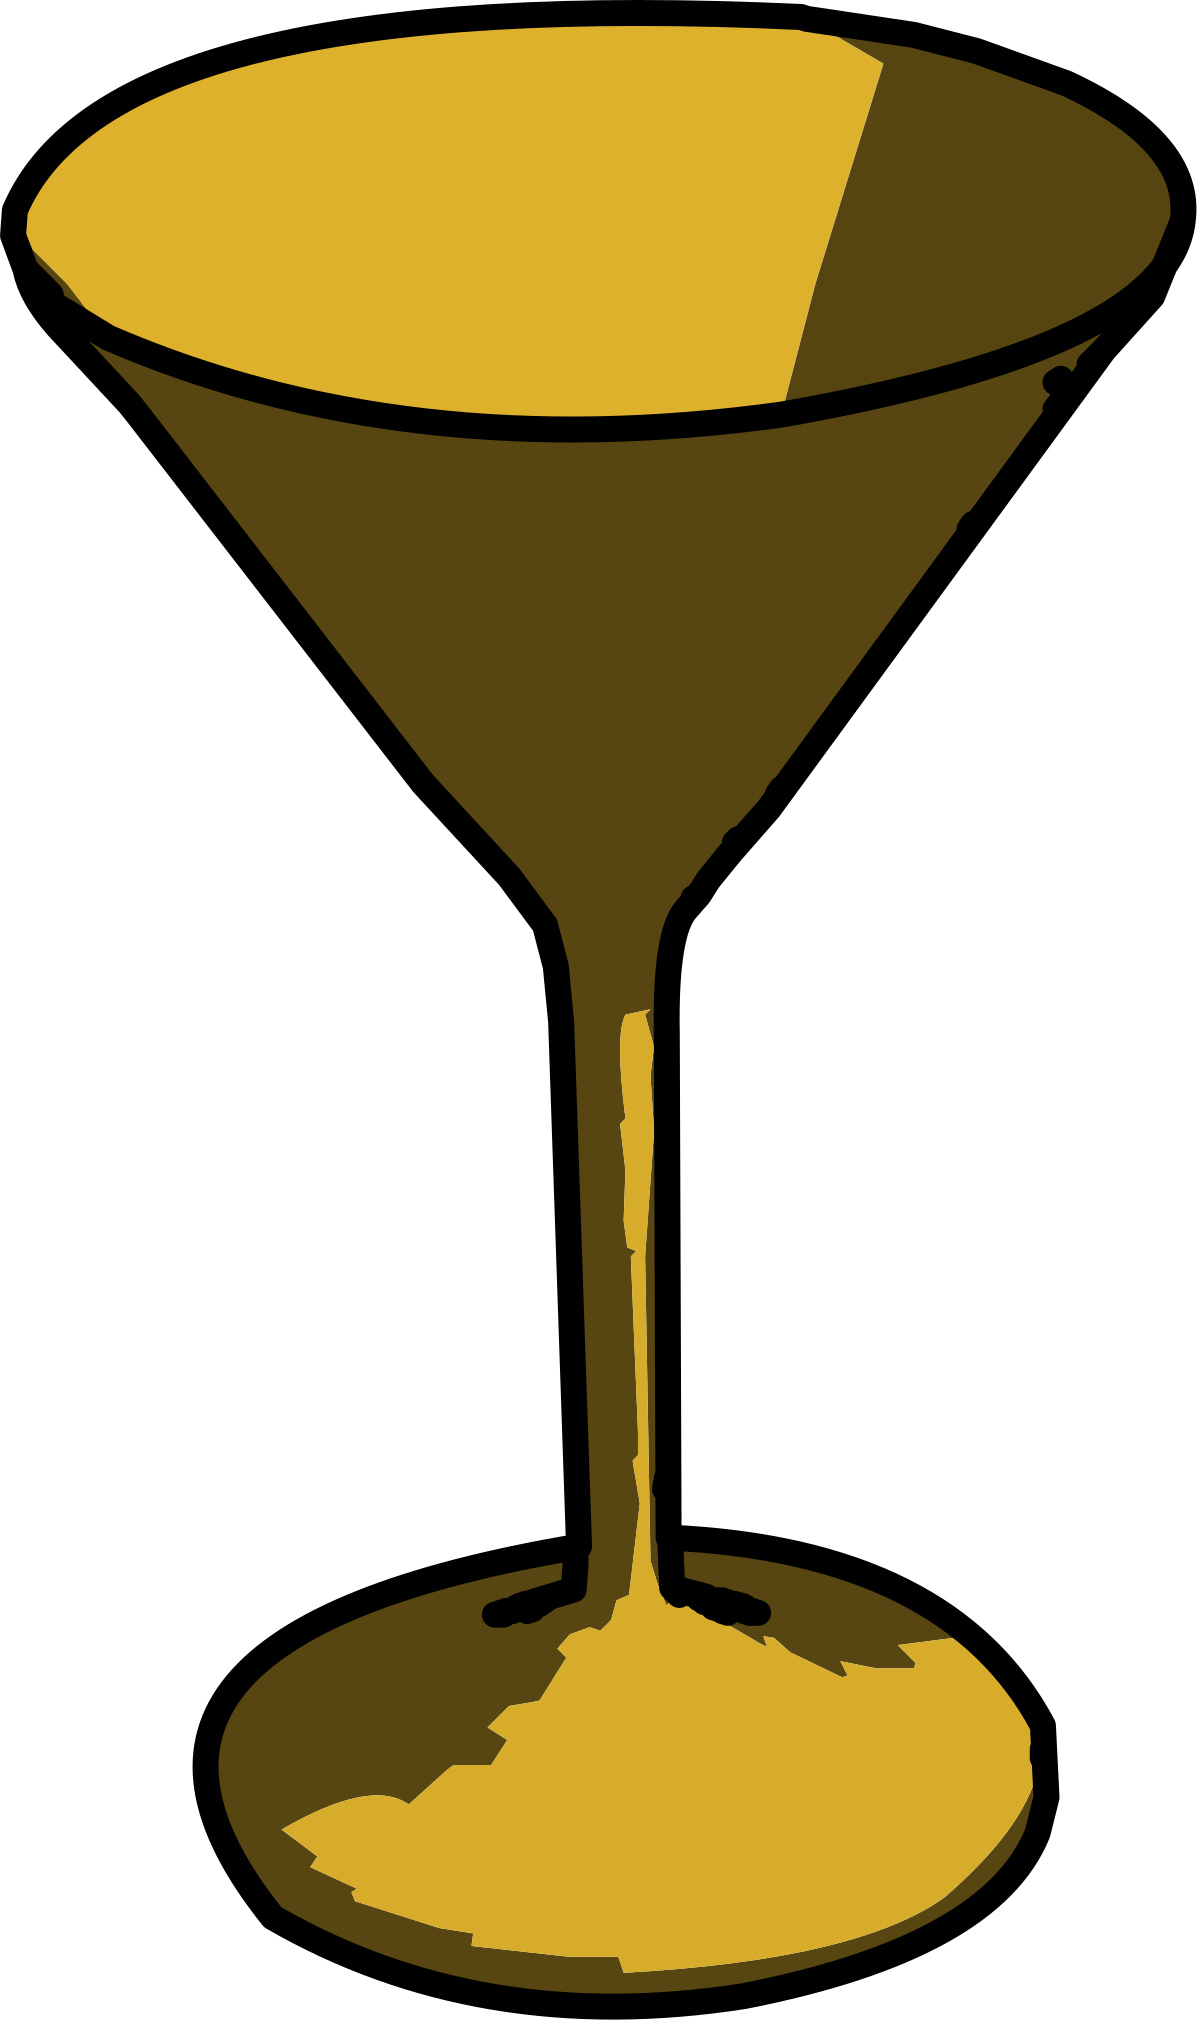 https://upload.wikimedia.org/wikipedia/commons/thumb/d/d9/Cocktail_Glas.svg/1200px-Cocktail_Glas.svg.png